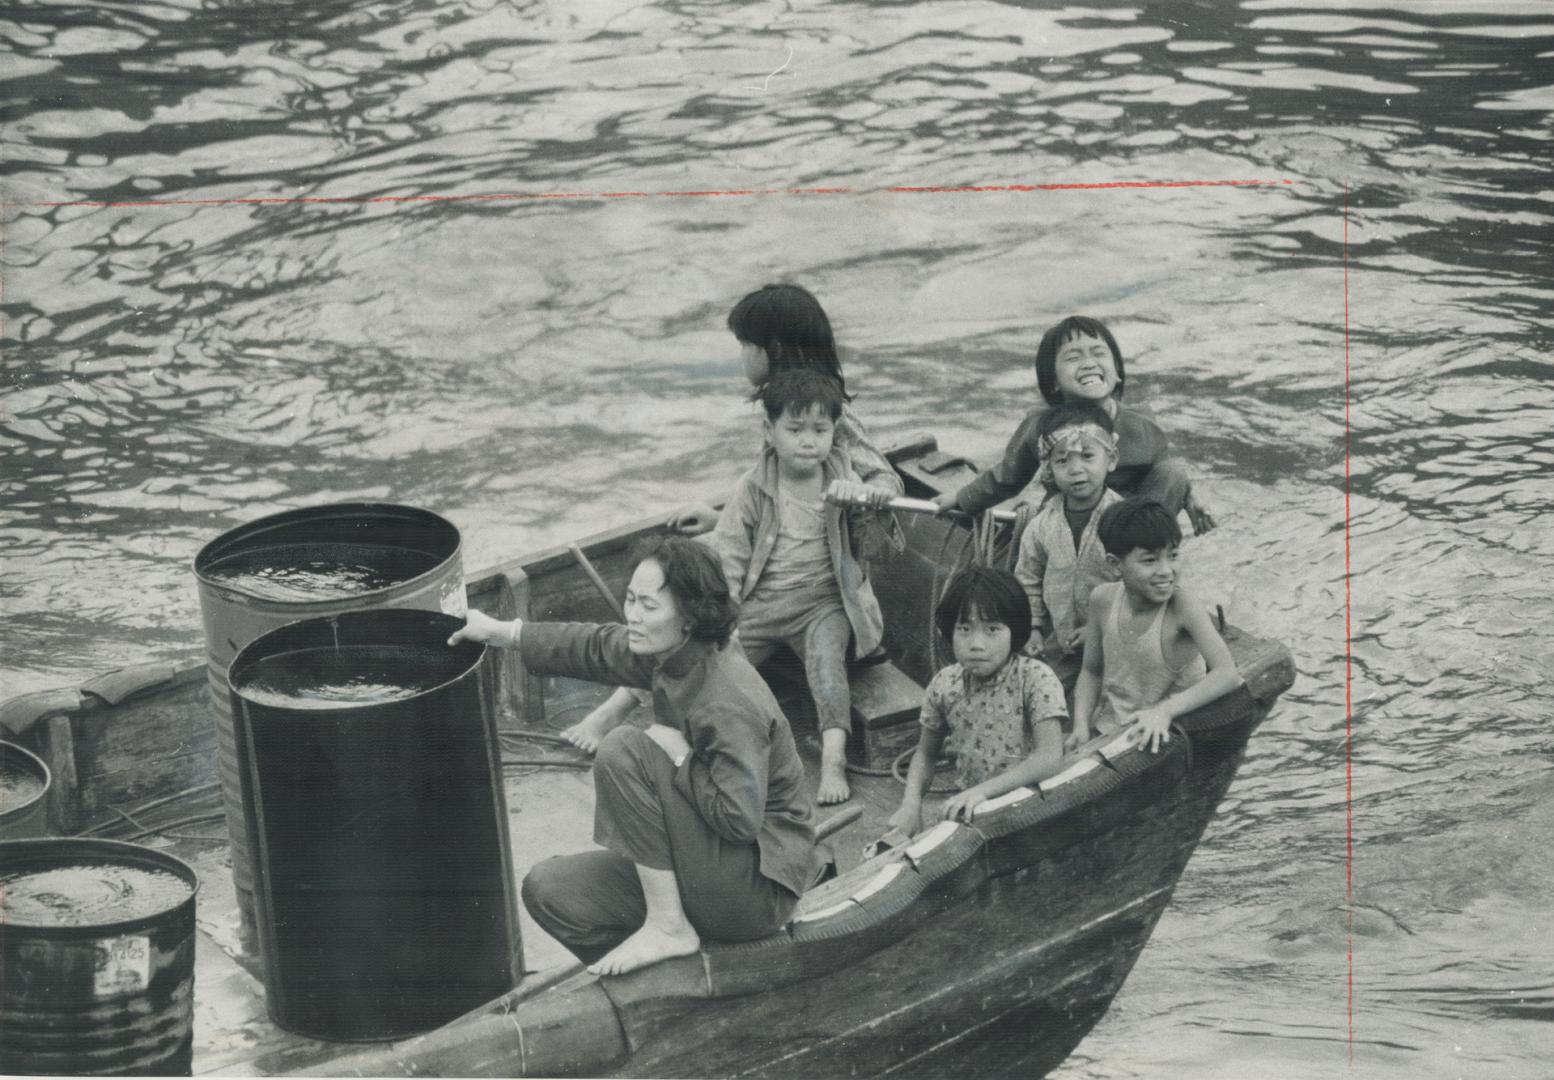 The water people of Hong Kong are born, live and die aboard the junks and small craft that populate the busy harbor